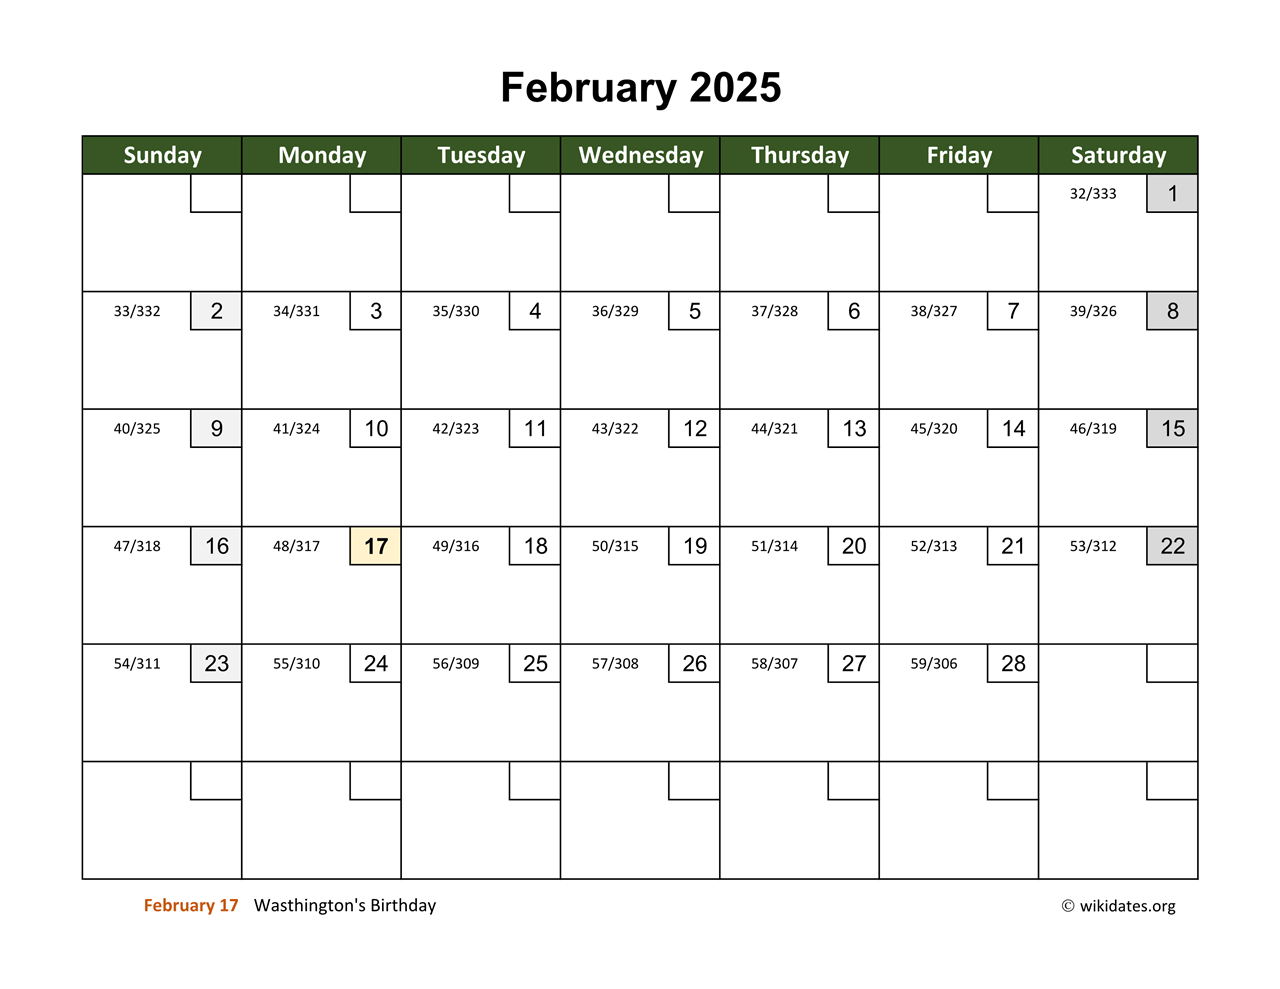 February 2025 Calendar With Day Numbers WikiDates